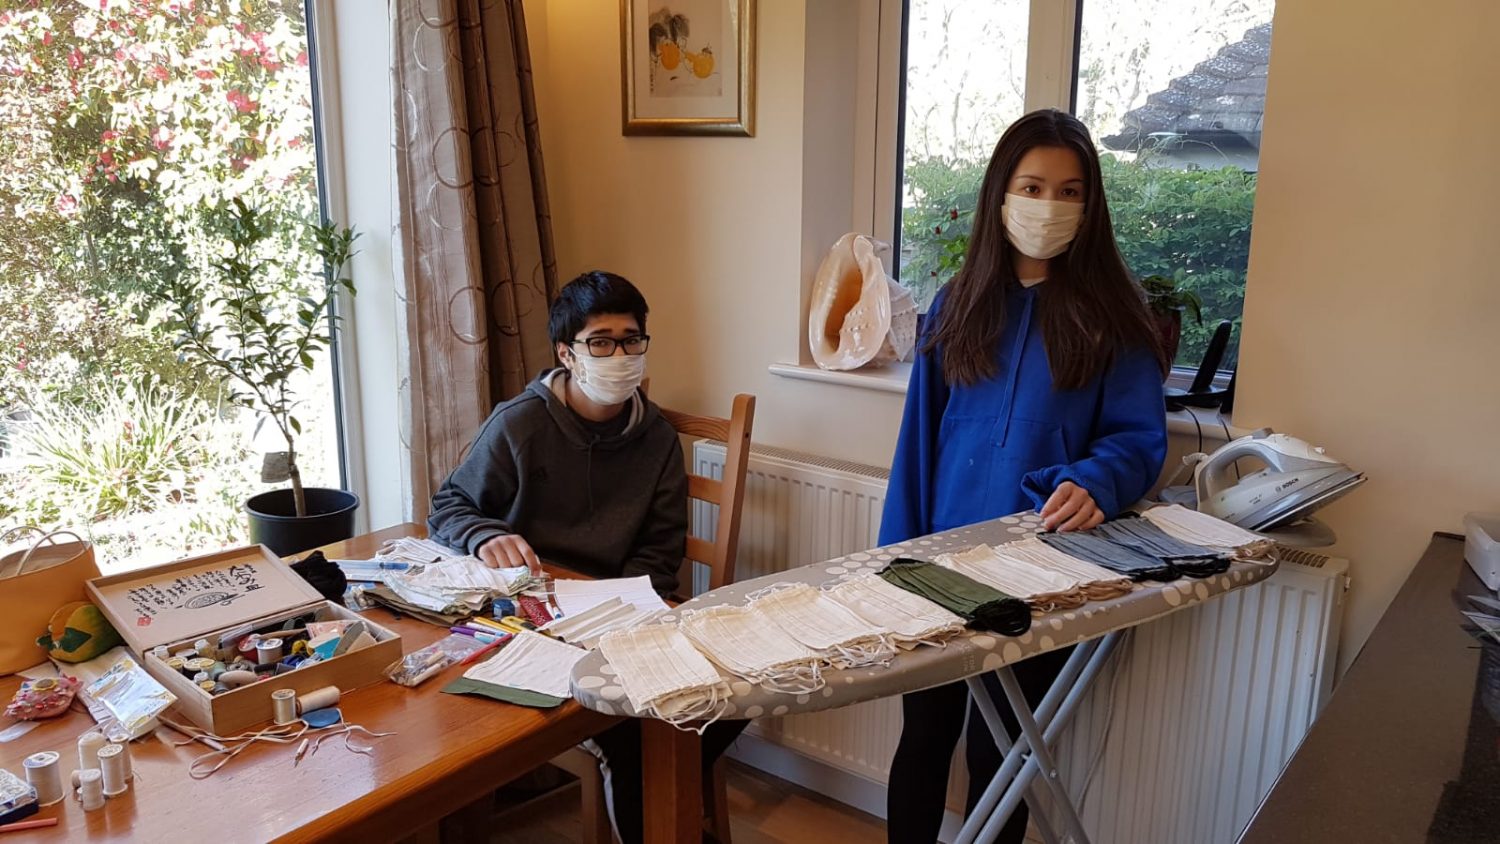 Boy and girl with face masks they have made on an ironing board